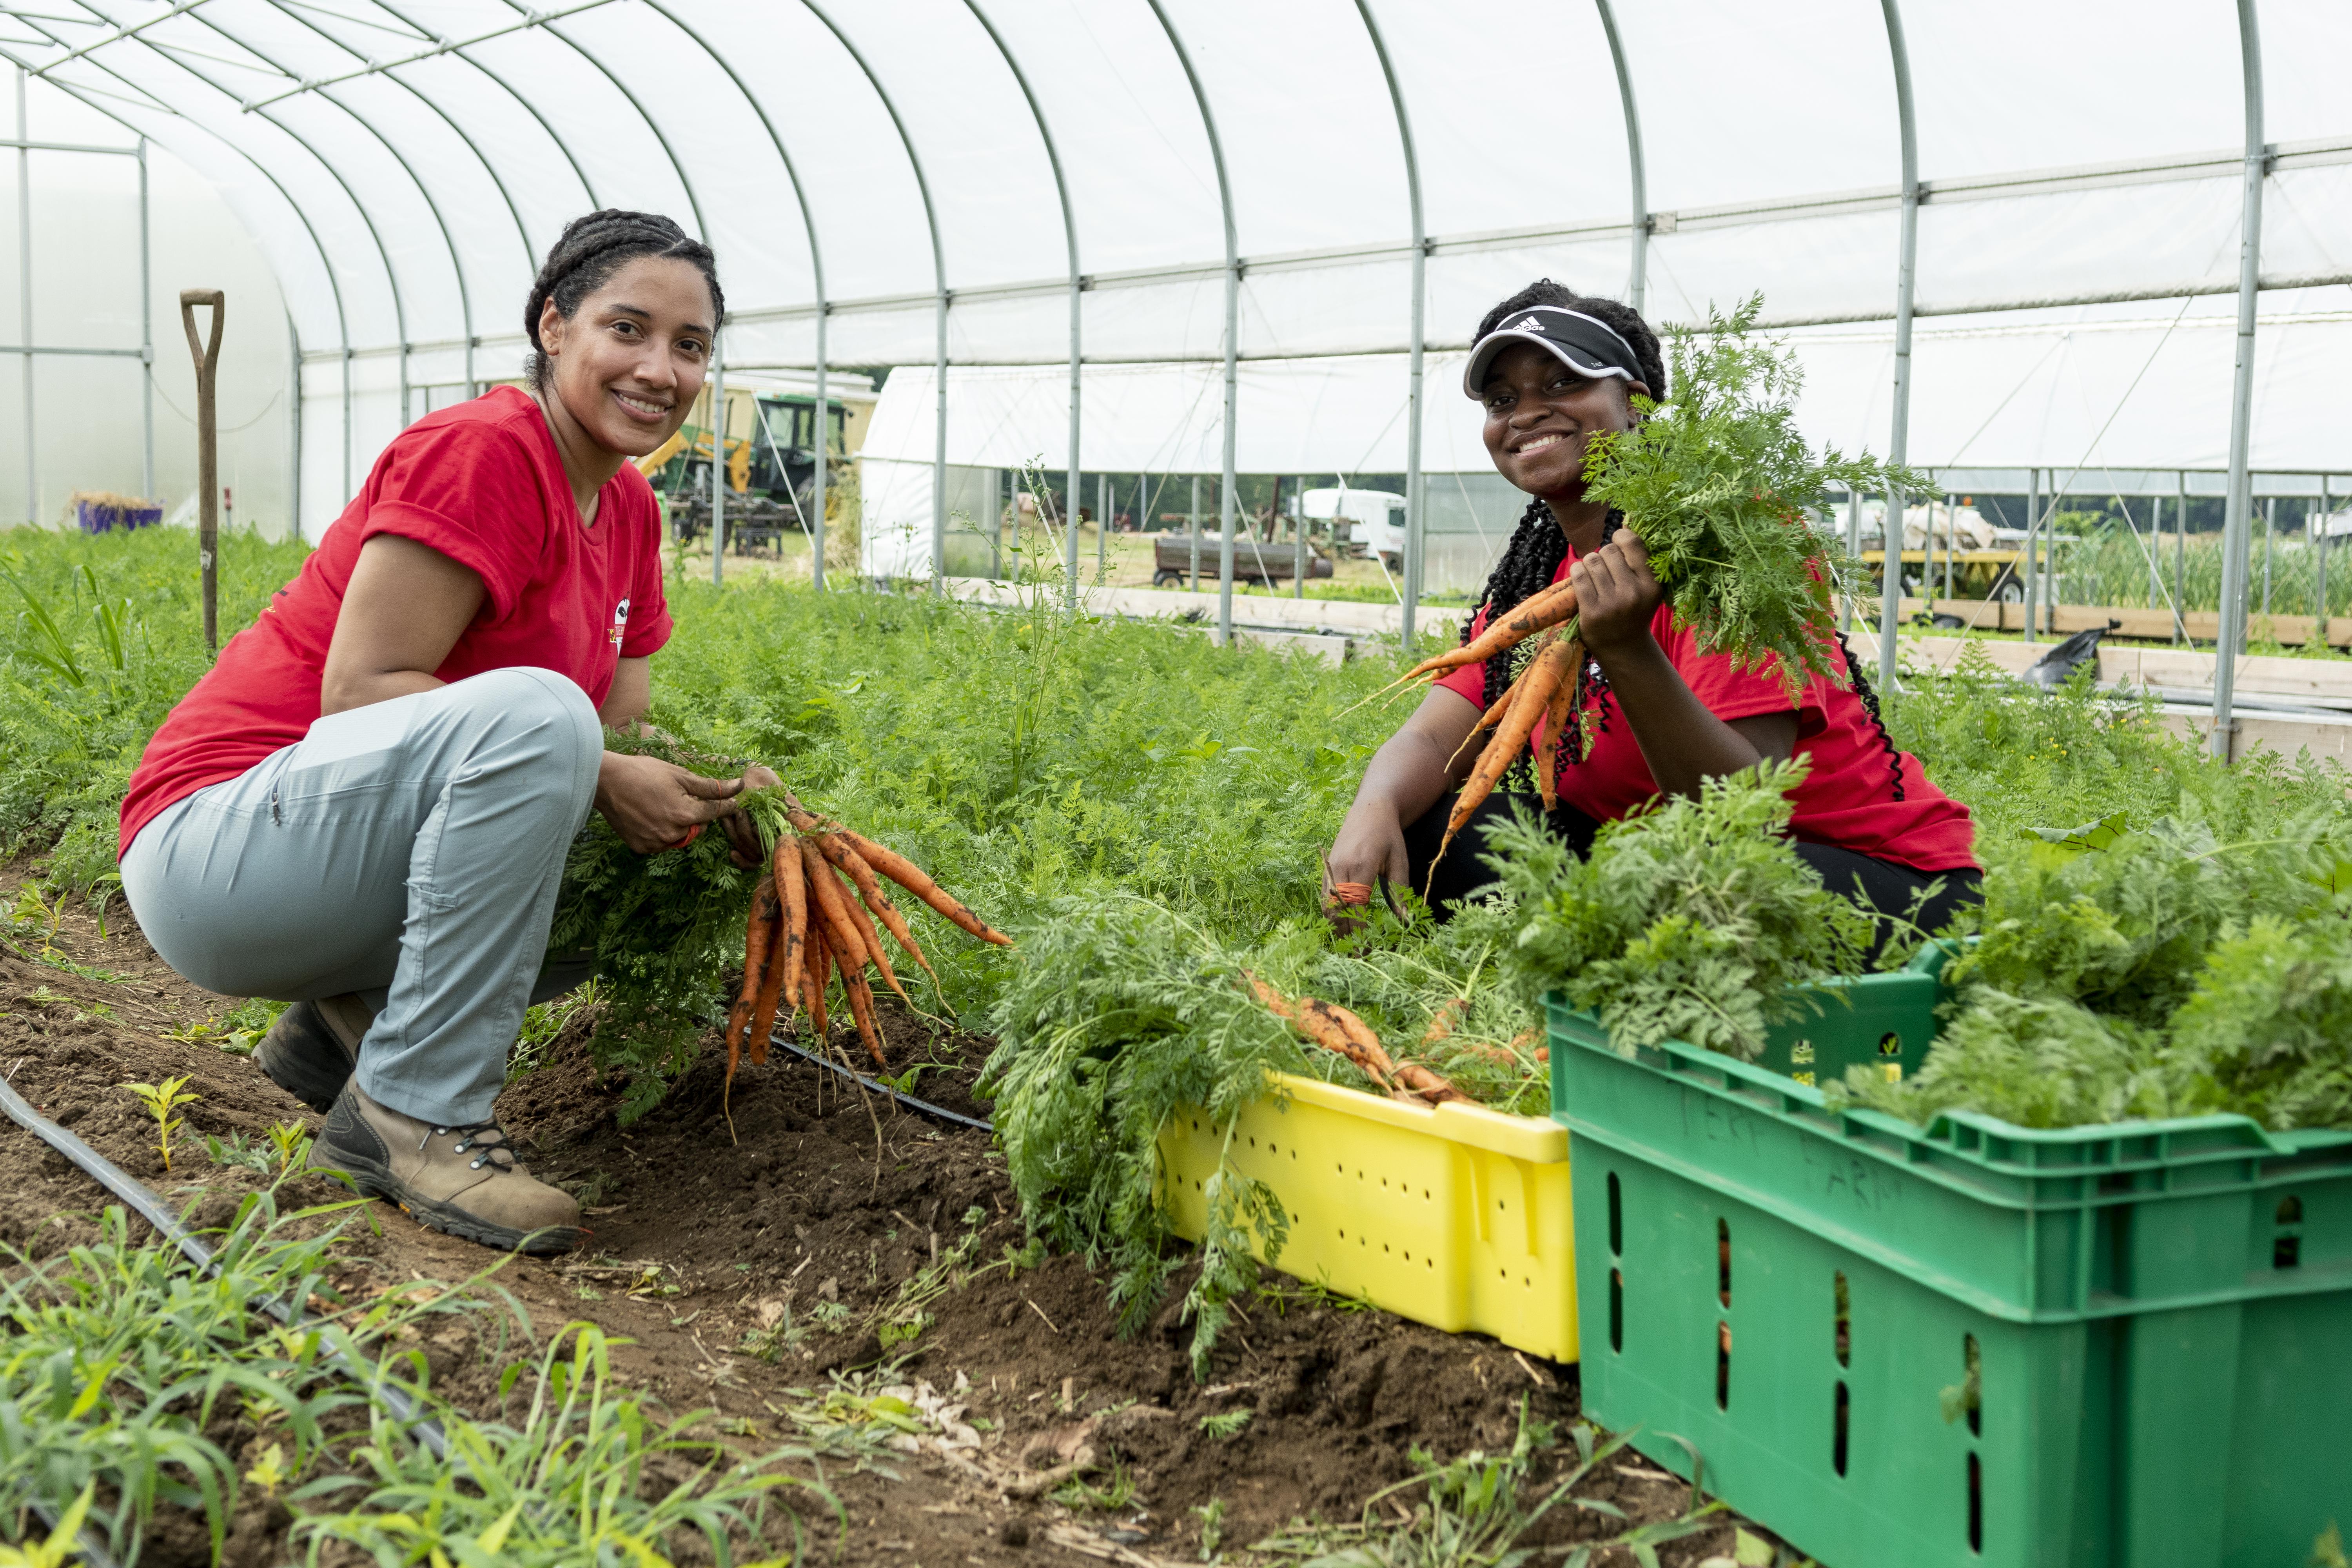 Two students work together, harvesting crops at Terp Farm.